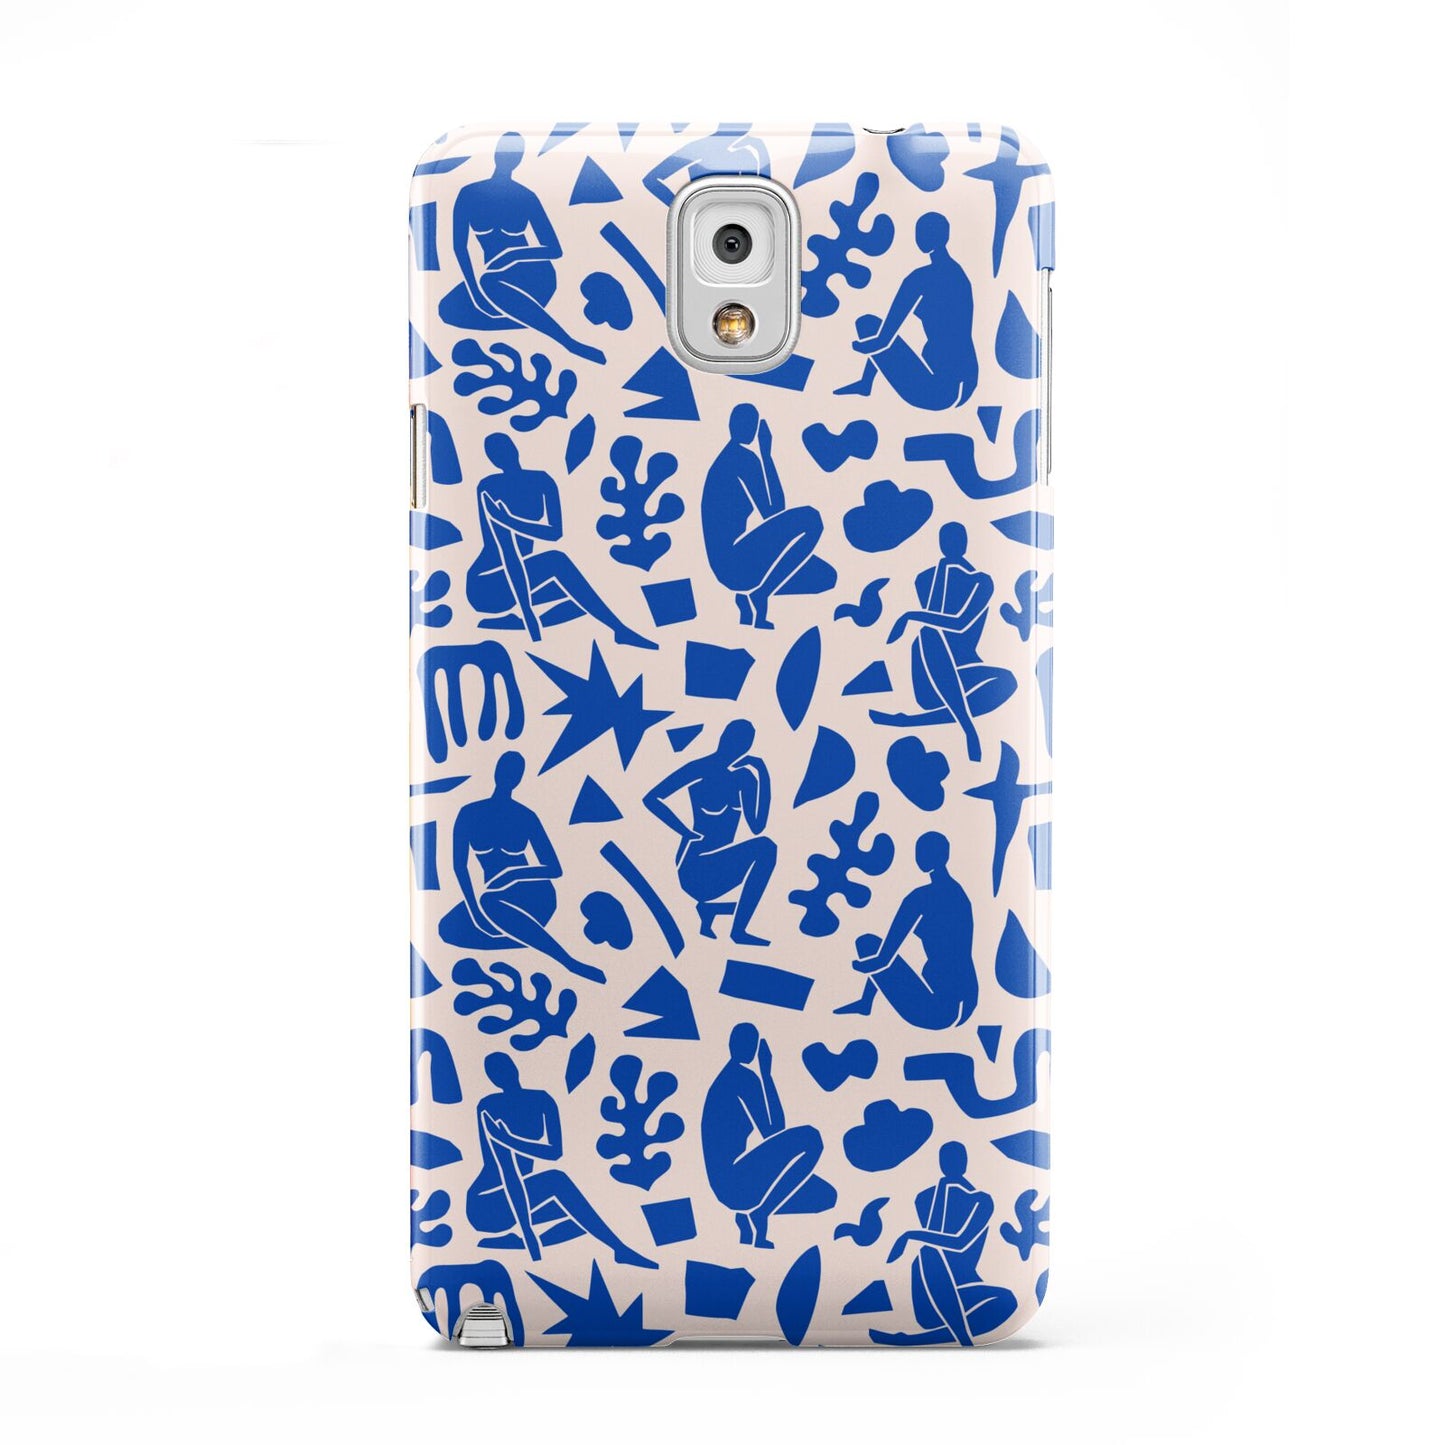 Abstract Art Samsung Galaxy Note 3 Case